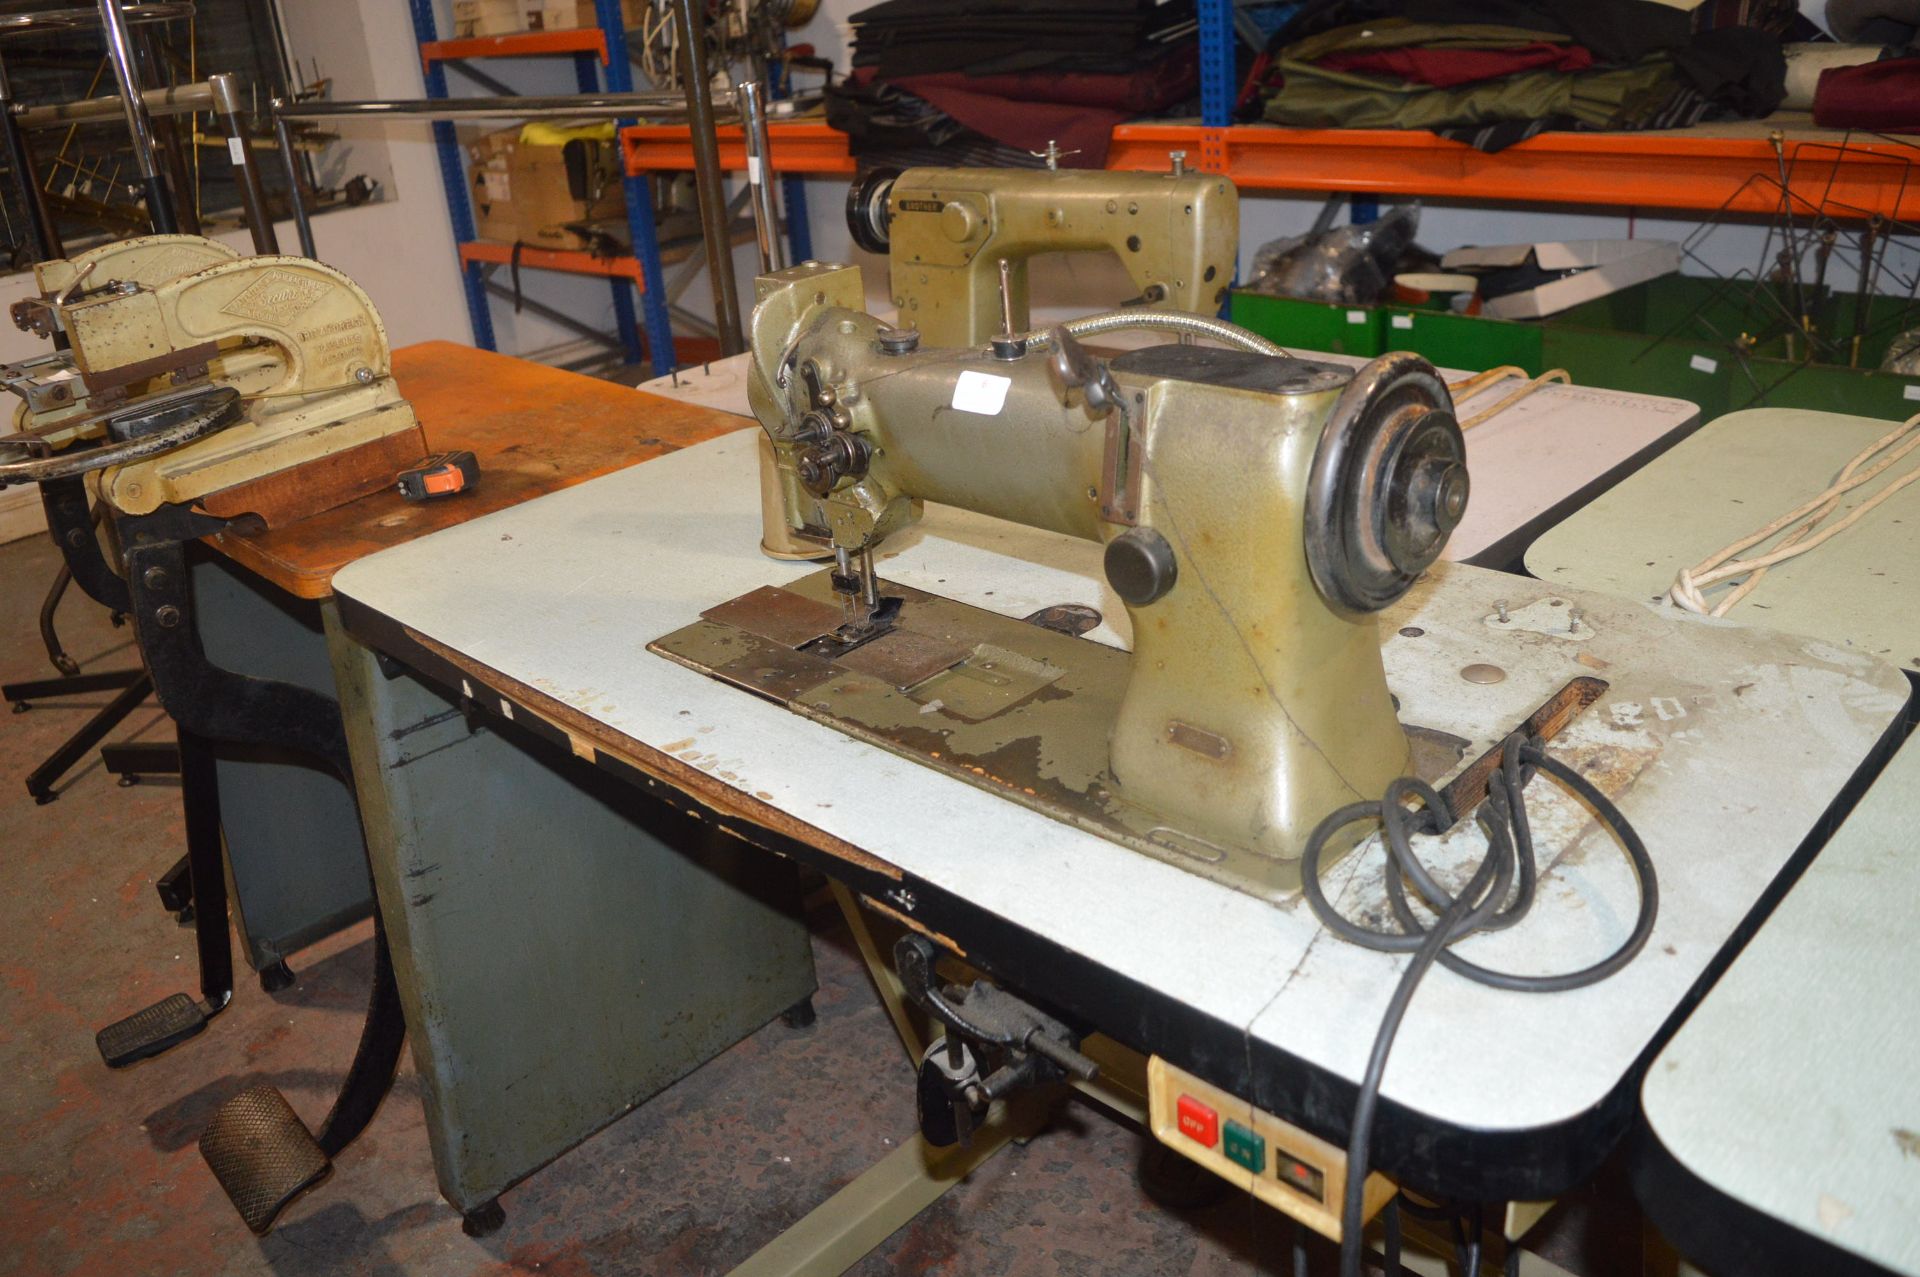 Electric Double Needle Sewing Machine on Table with Motor (condition unknown) - Image 3 of 3